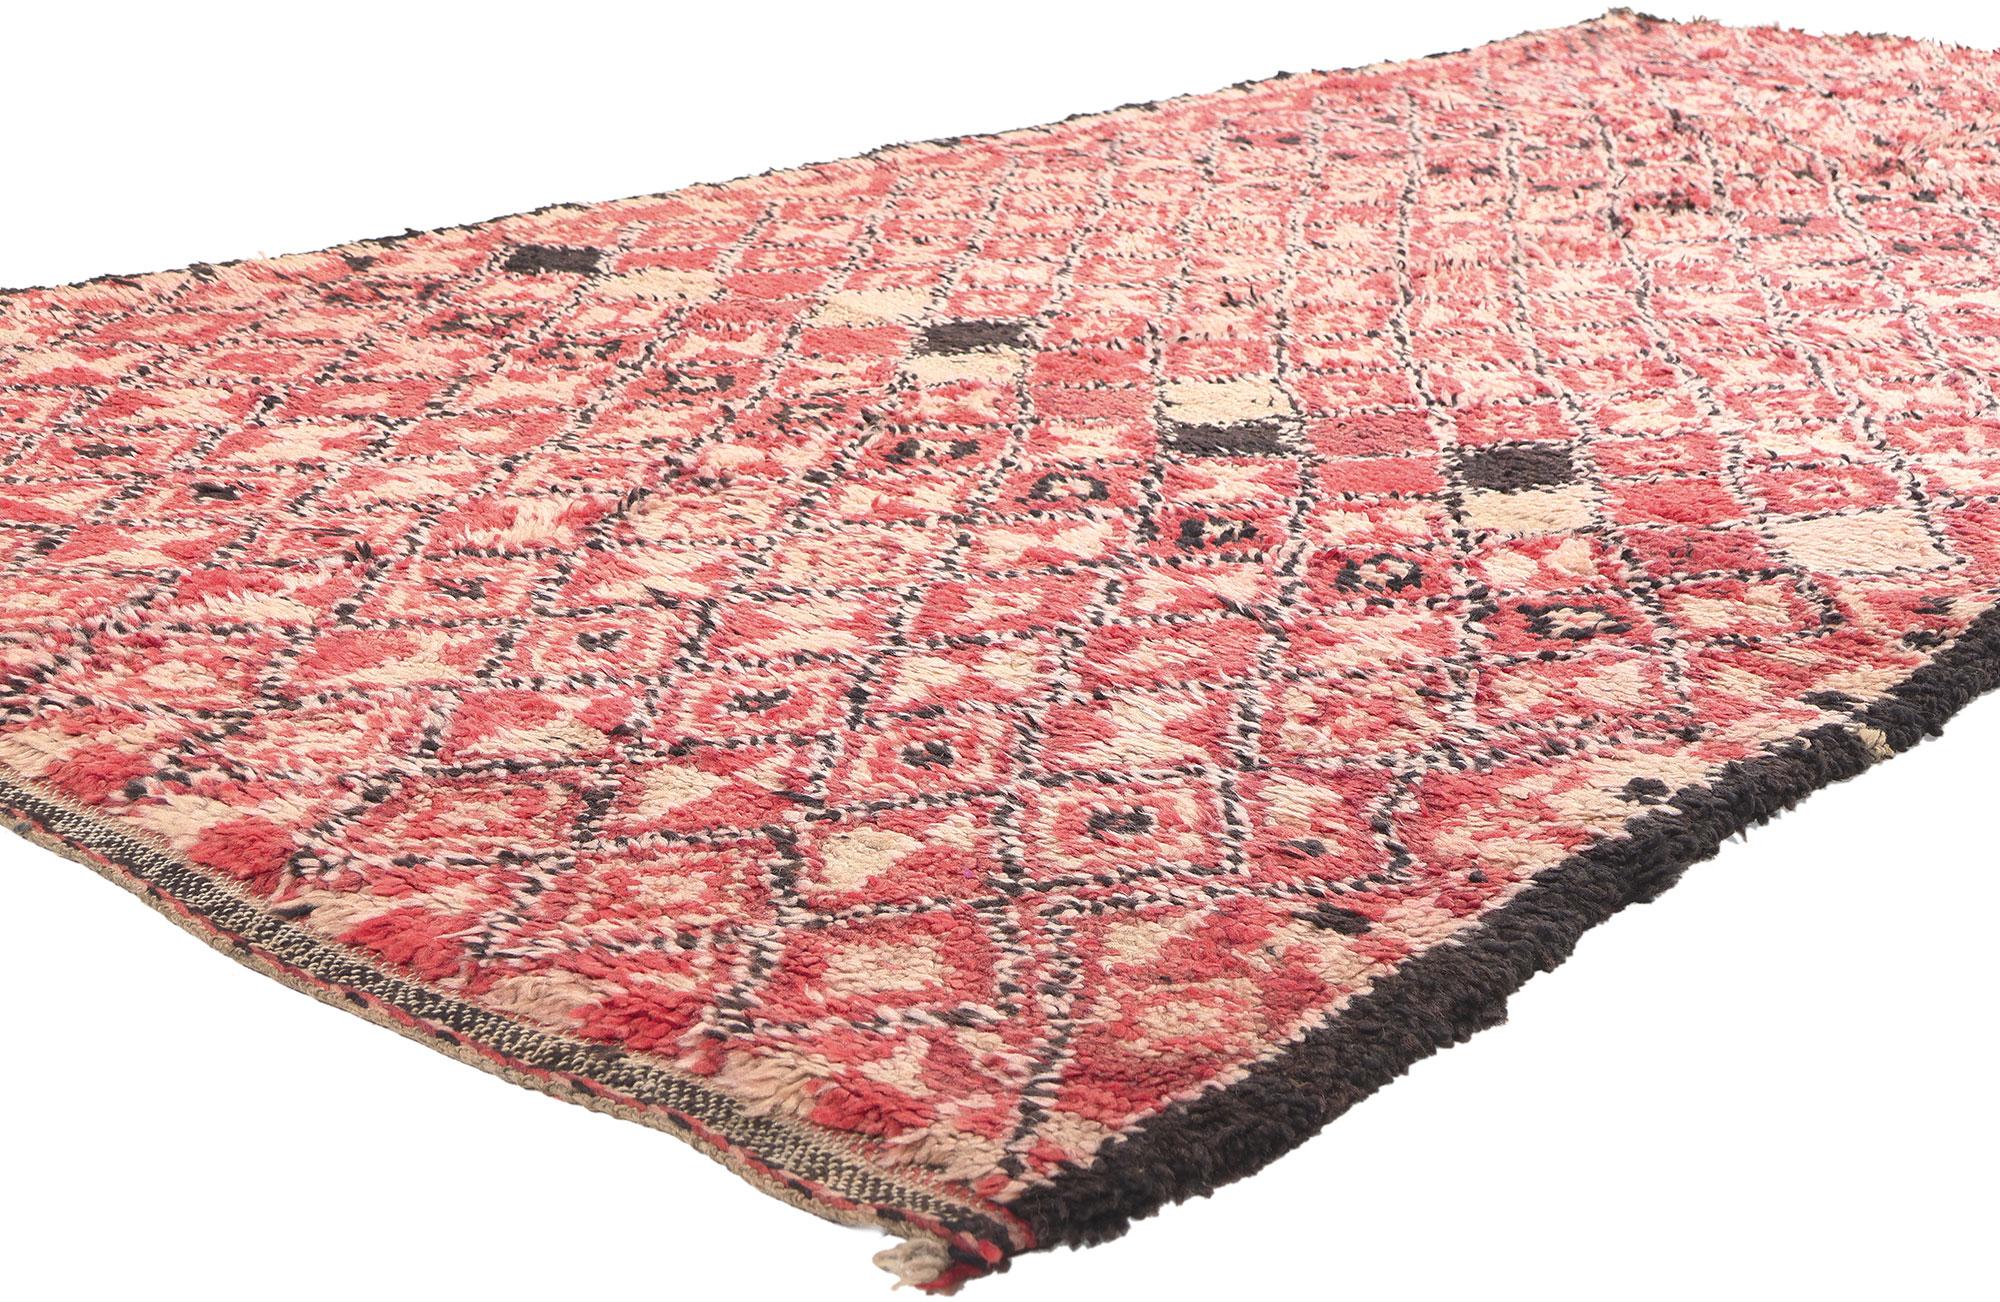 21243 Vintage Red Beni MGuild Moroccan Rug, 05'04 x 10'05. Steeped in the mystical heritage of Berber craftsmanship, this hand-knotted wool vintage Beni Mguild Moroccan rug is a captivating fusion of Midcentury and Bohemian styles. Crafted by the